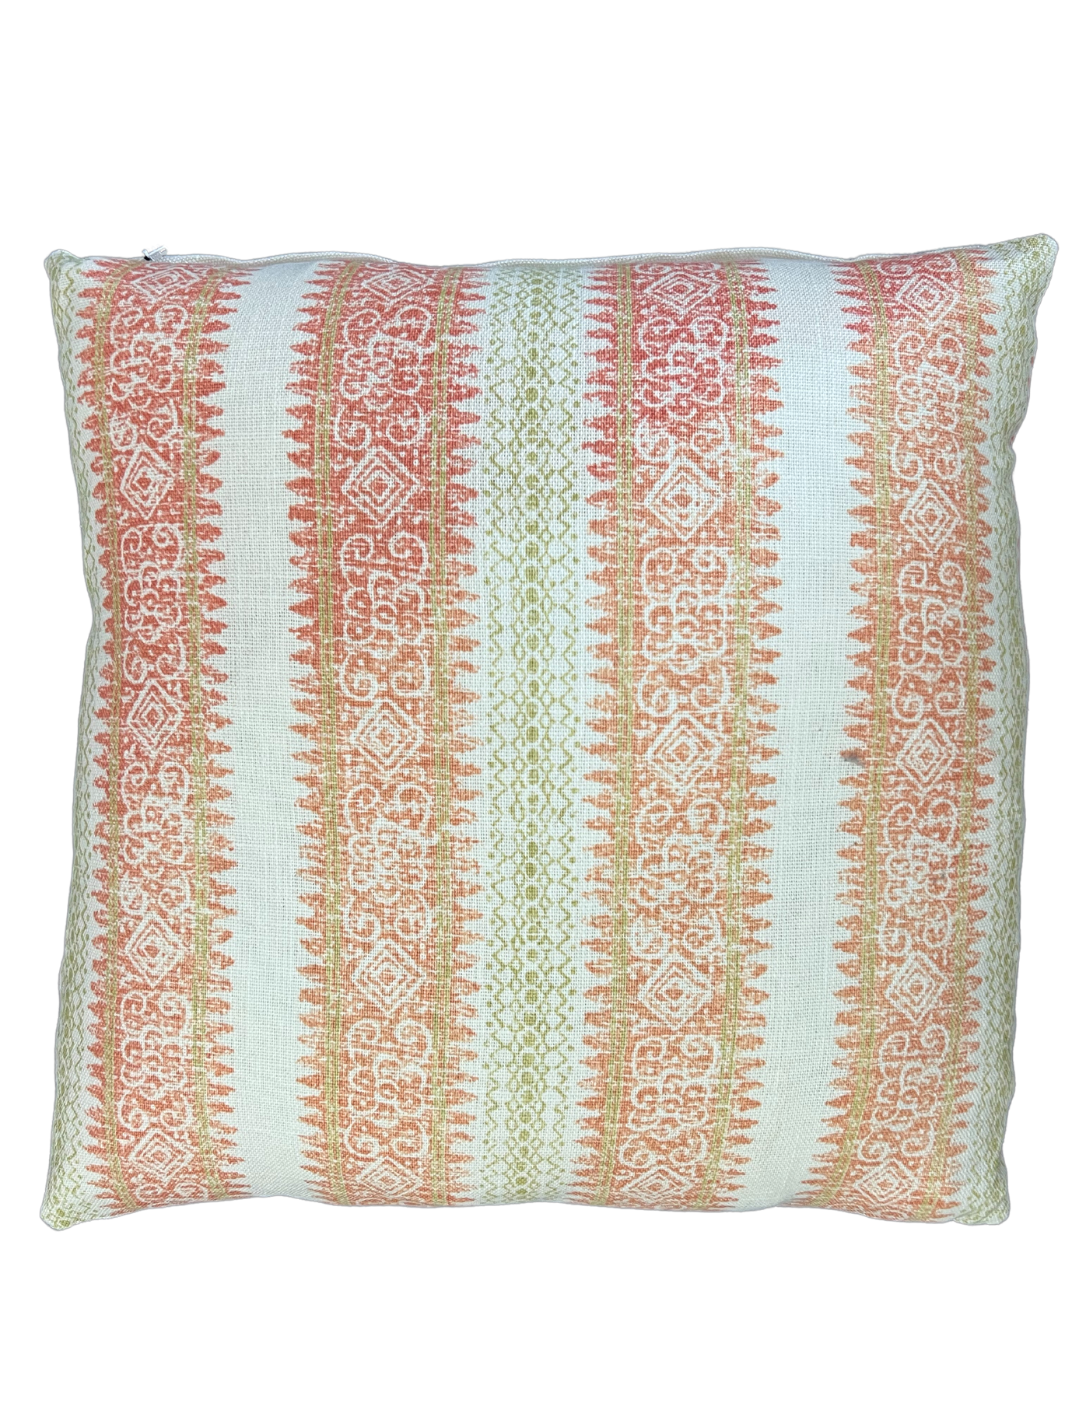 Henna Pillow, Pink and Olive